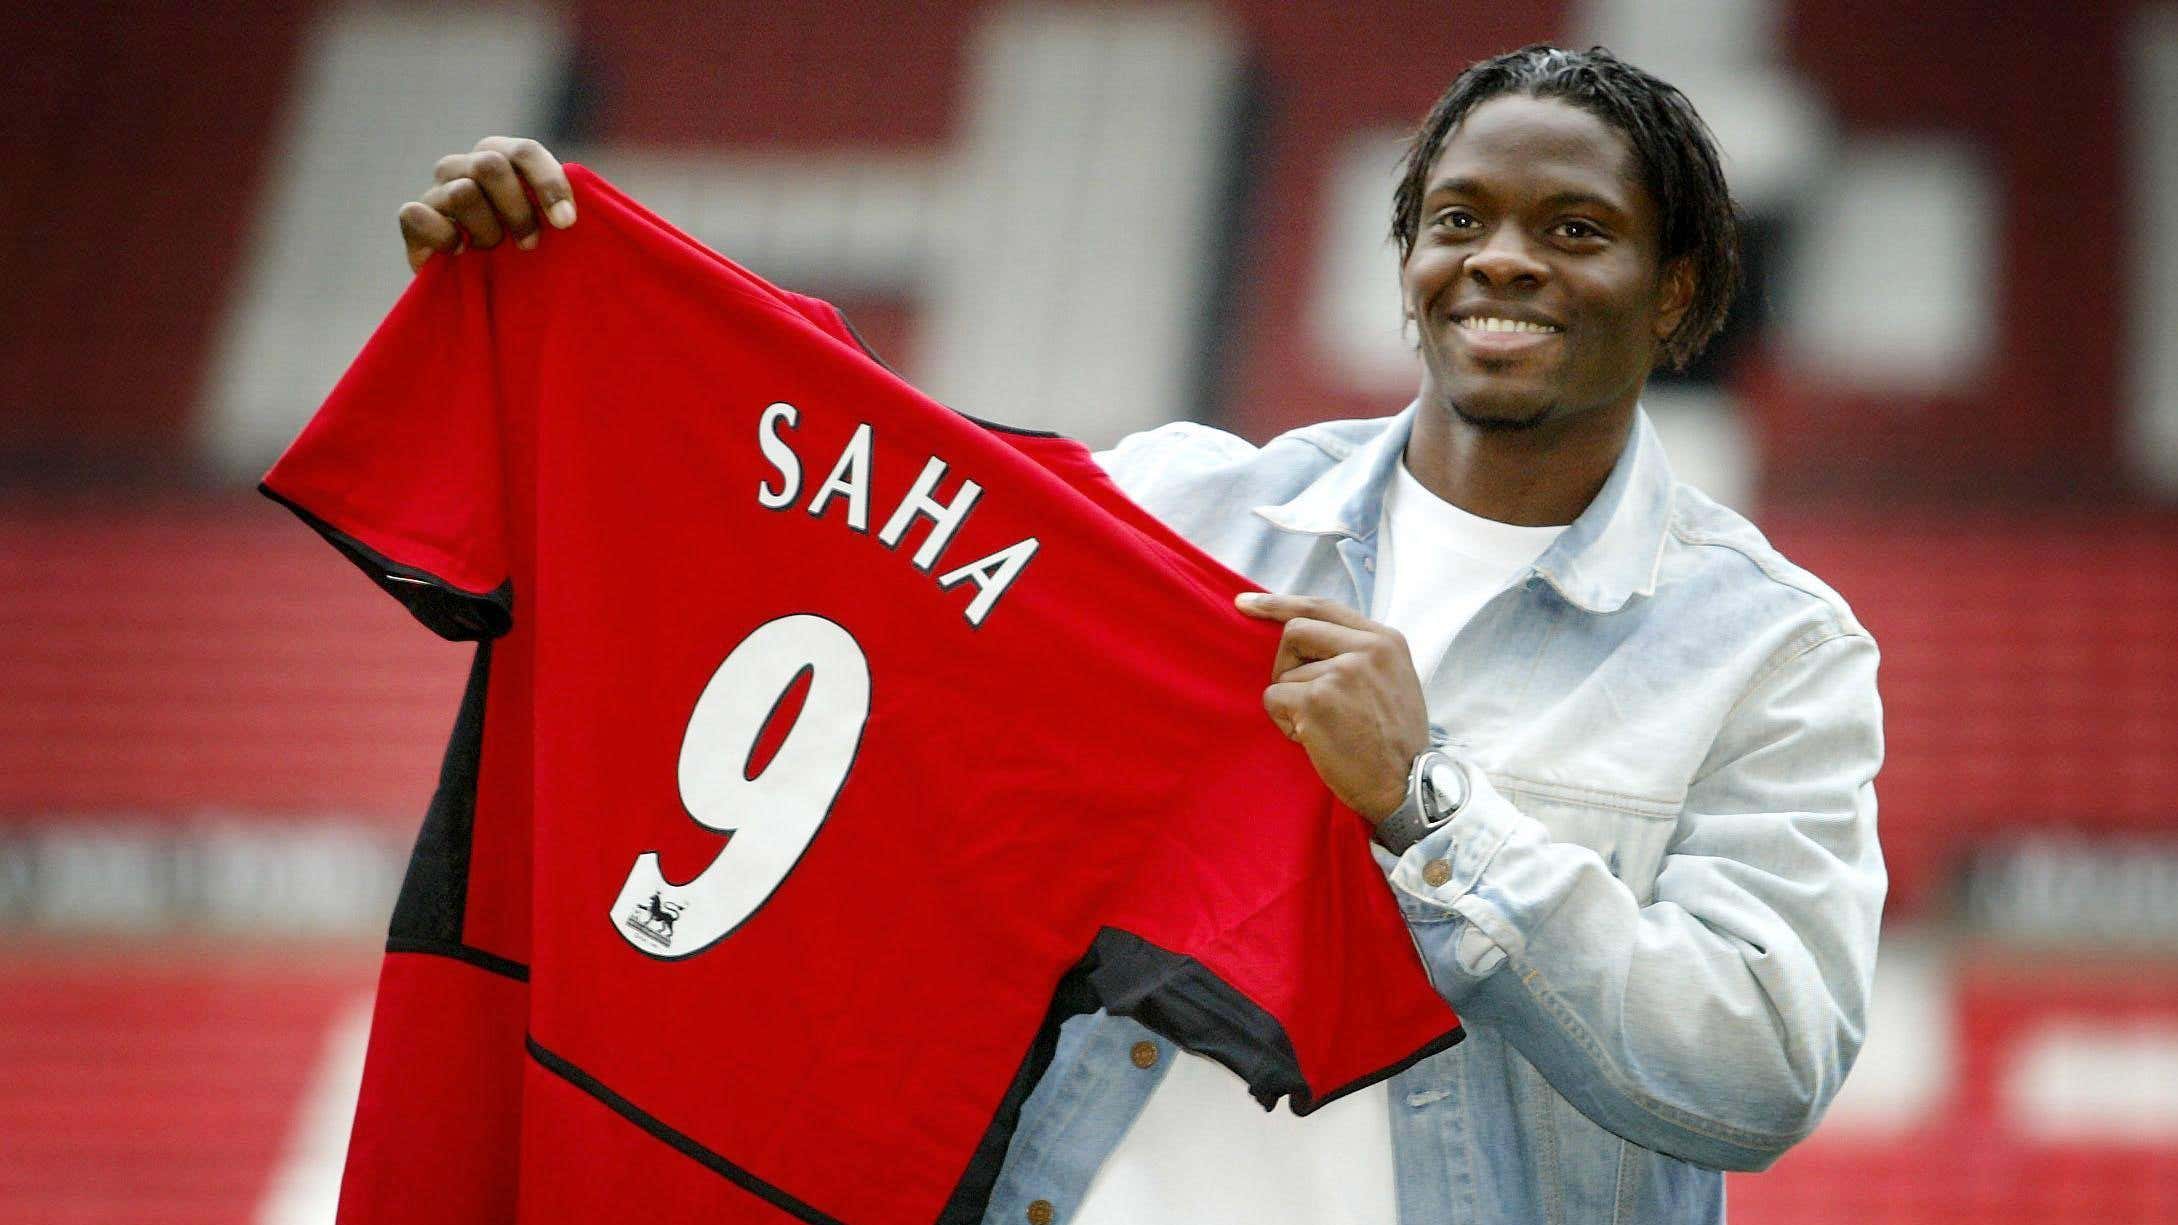 On this day in 2004: Manchester United sign striker Louis Saha from Fulham